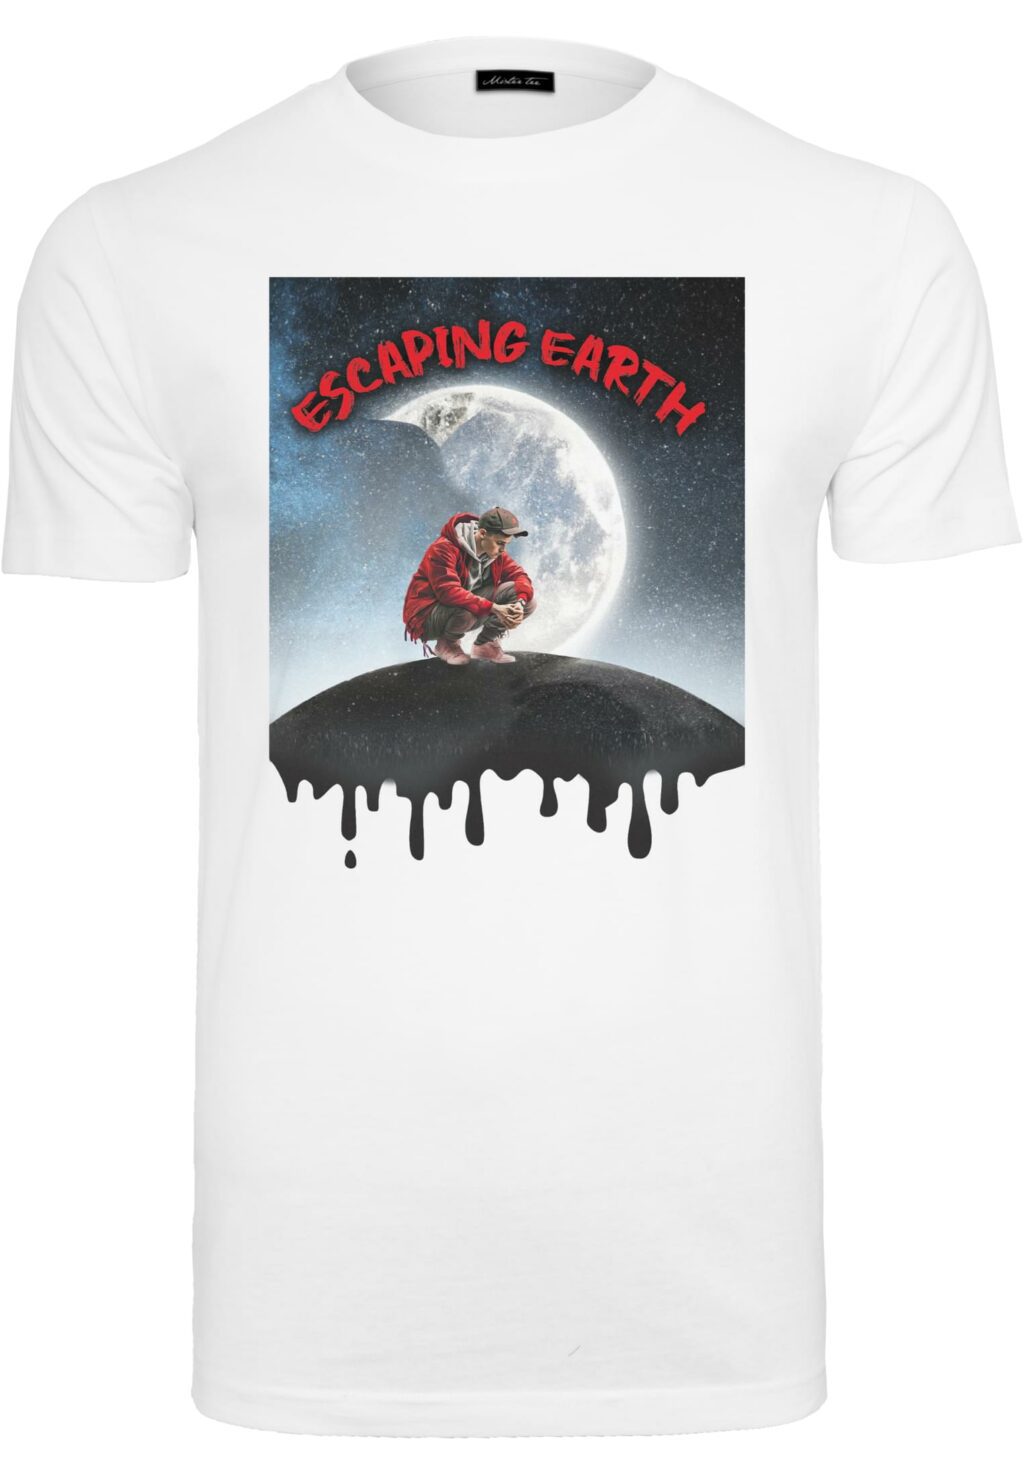 Escaping Earth Tee white MT2802